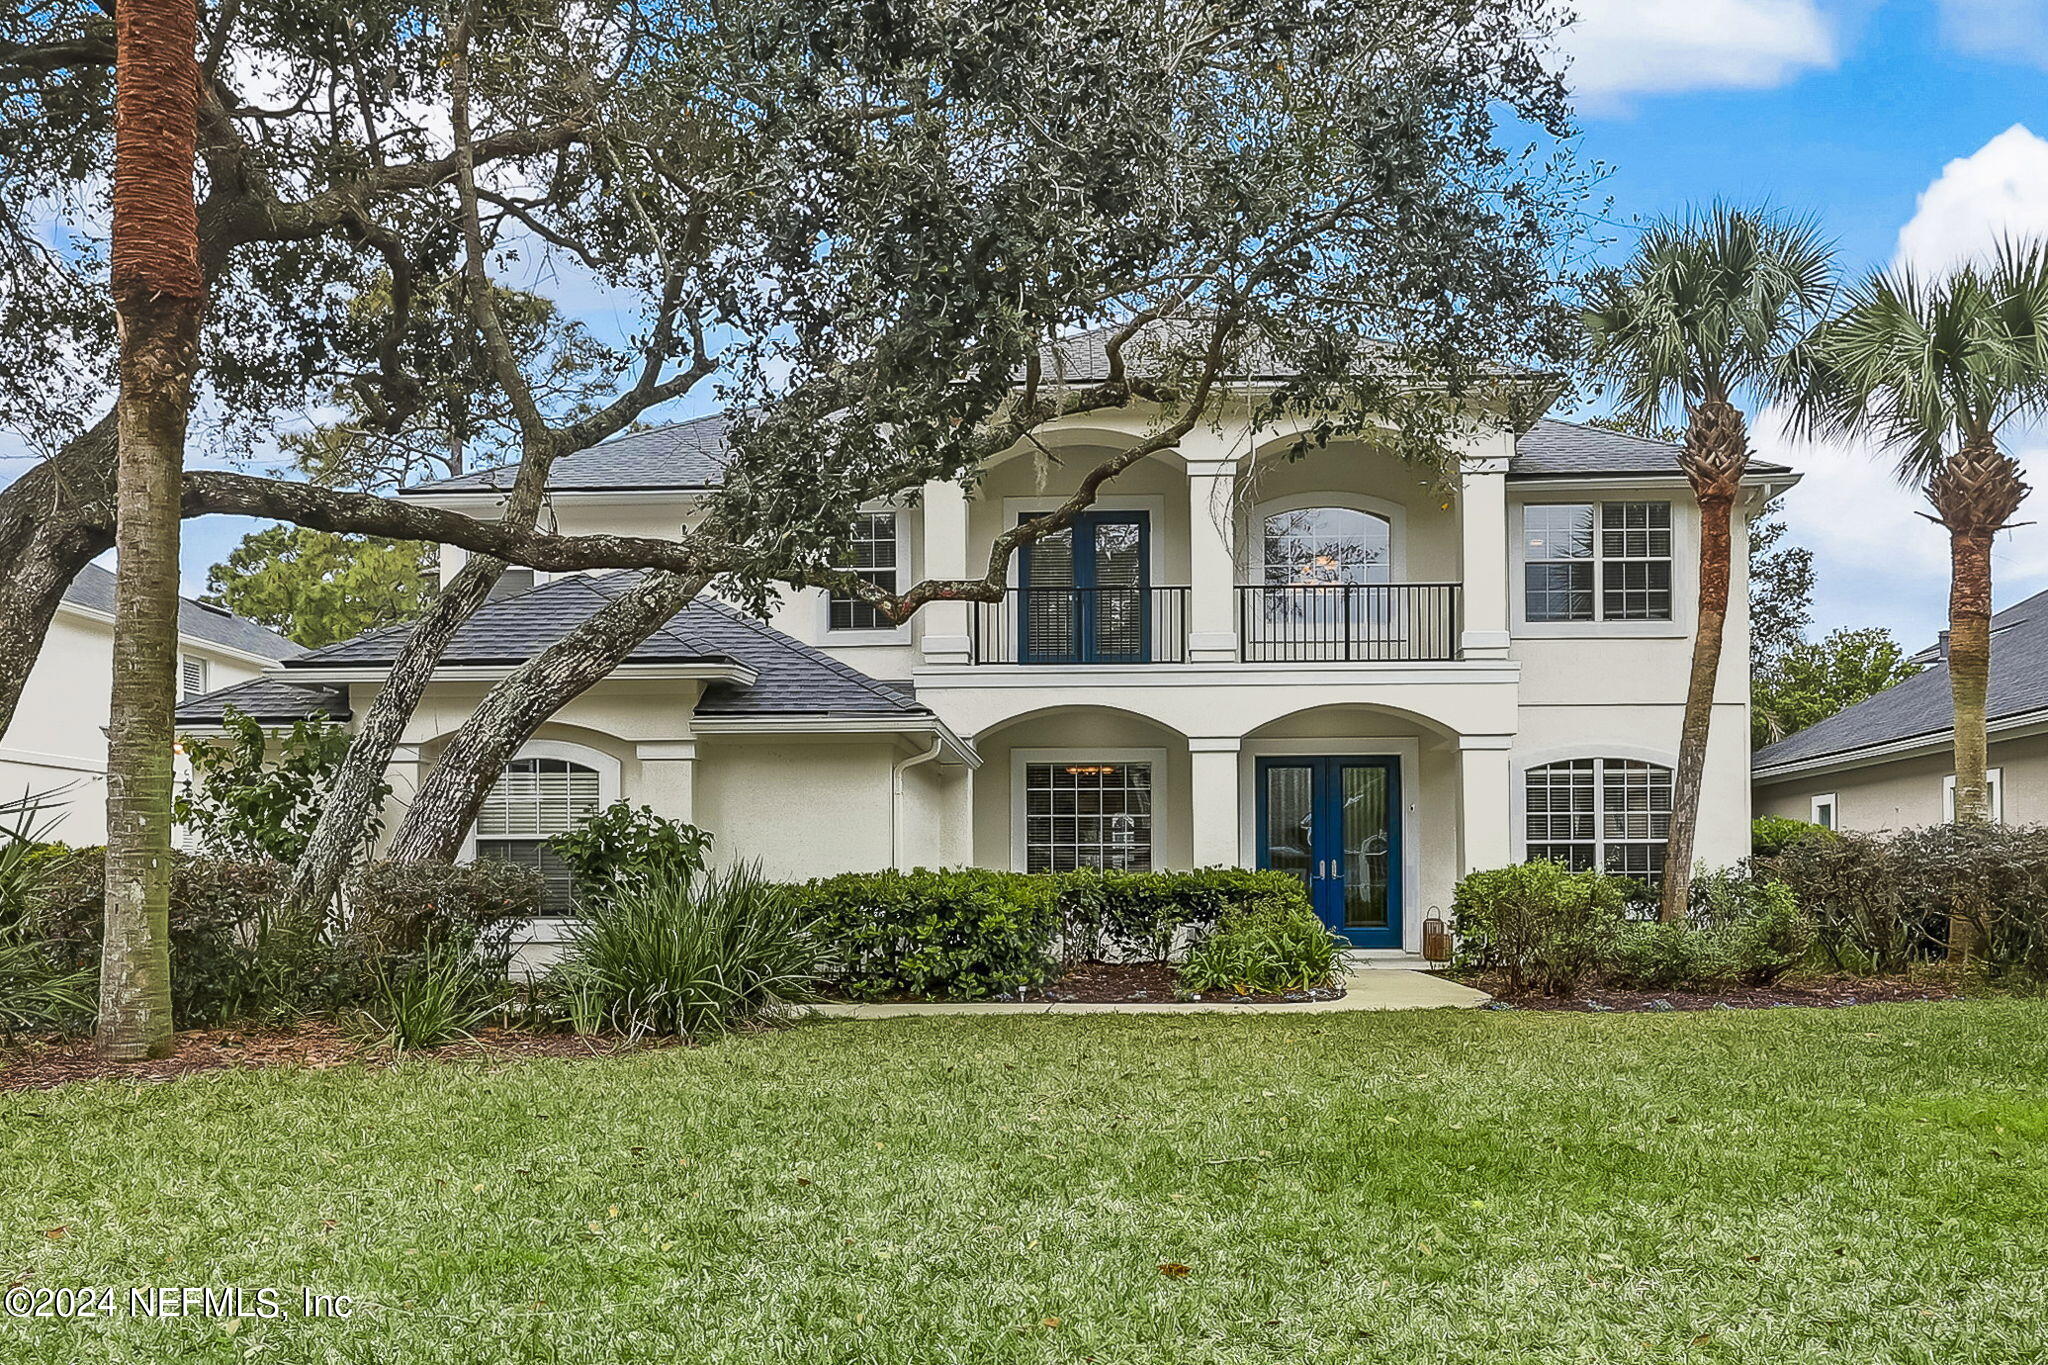 Ponte Vedra Beach, FL home for sale located at 521 S Sea Lake, Ponte Vedra Beach, FL 32082